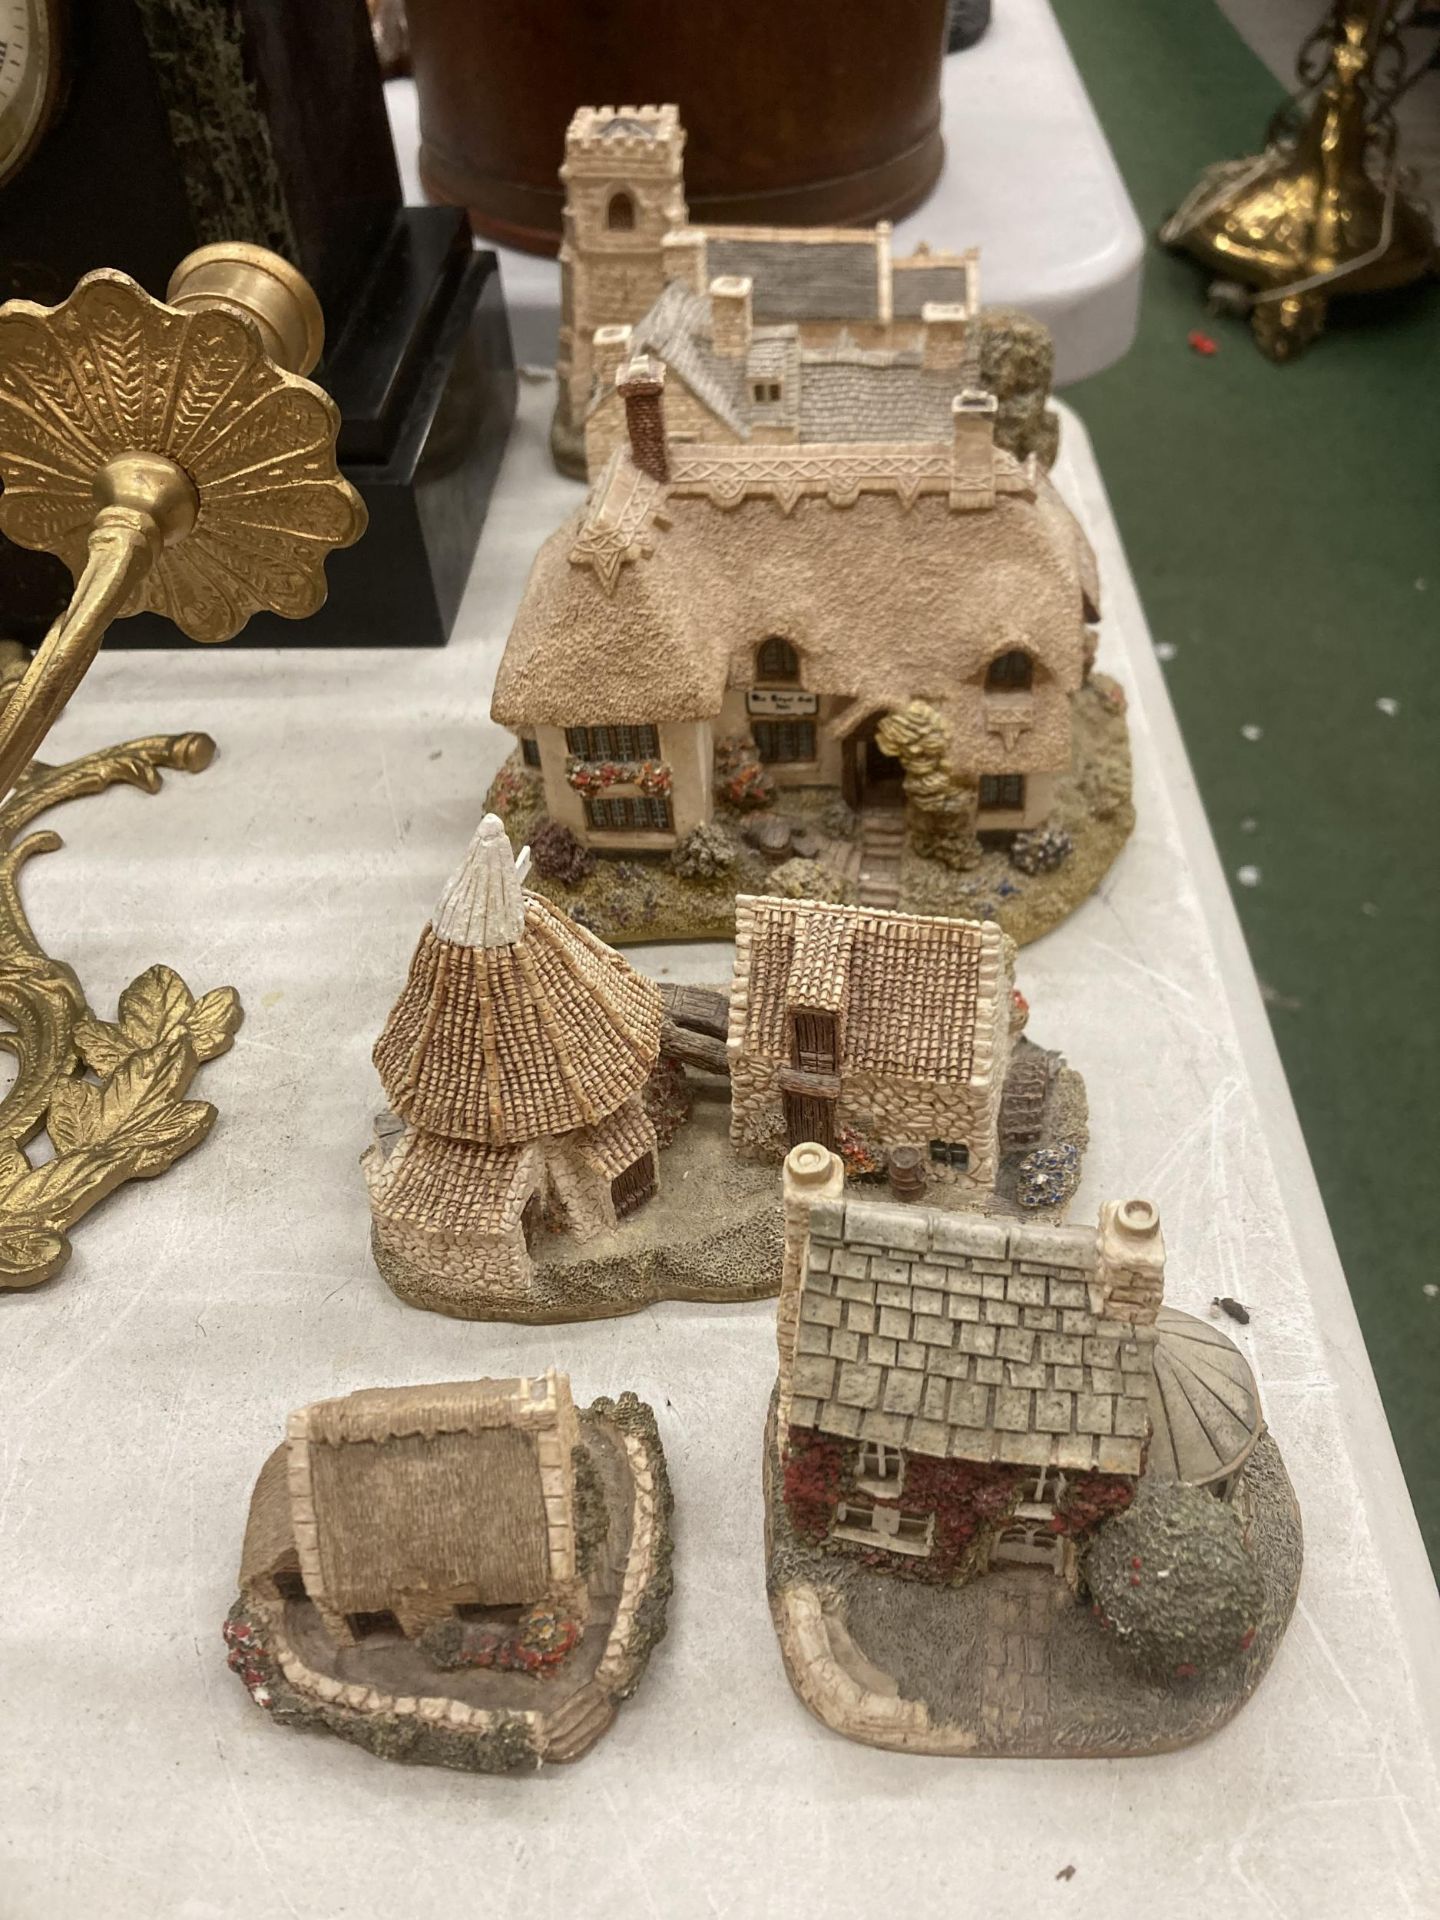 A COLLECTION OF LILLIPUT LANE COTTAGES TO INCLUDE 'ROYAL OAK INN', 'MORETON MANOR', ETC - 6 IN TOTAL